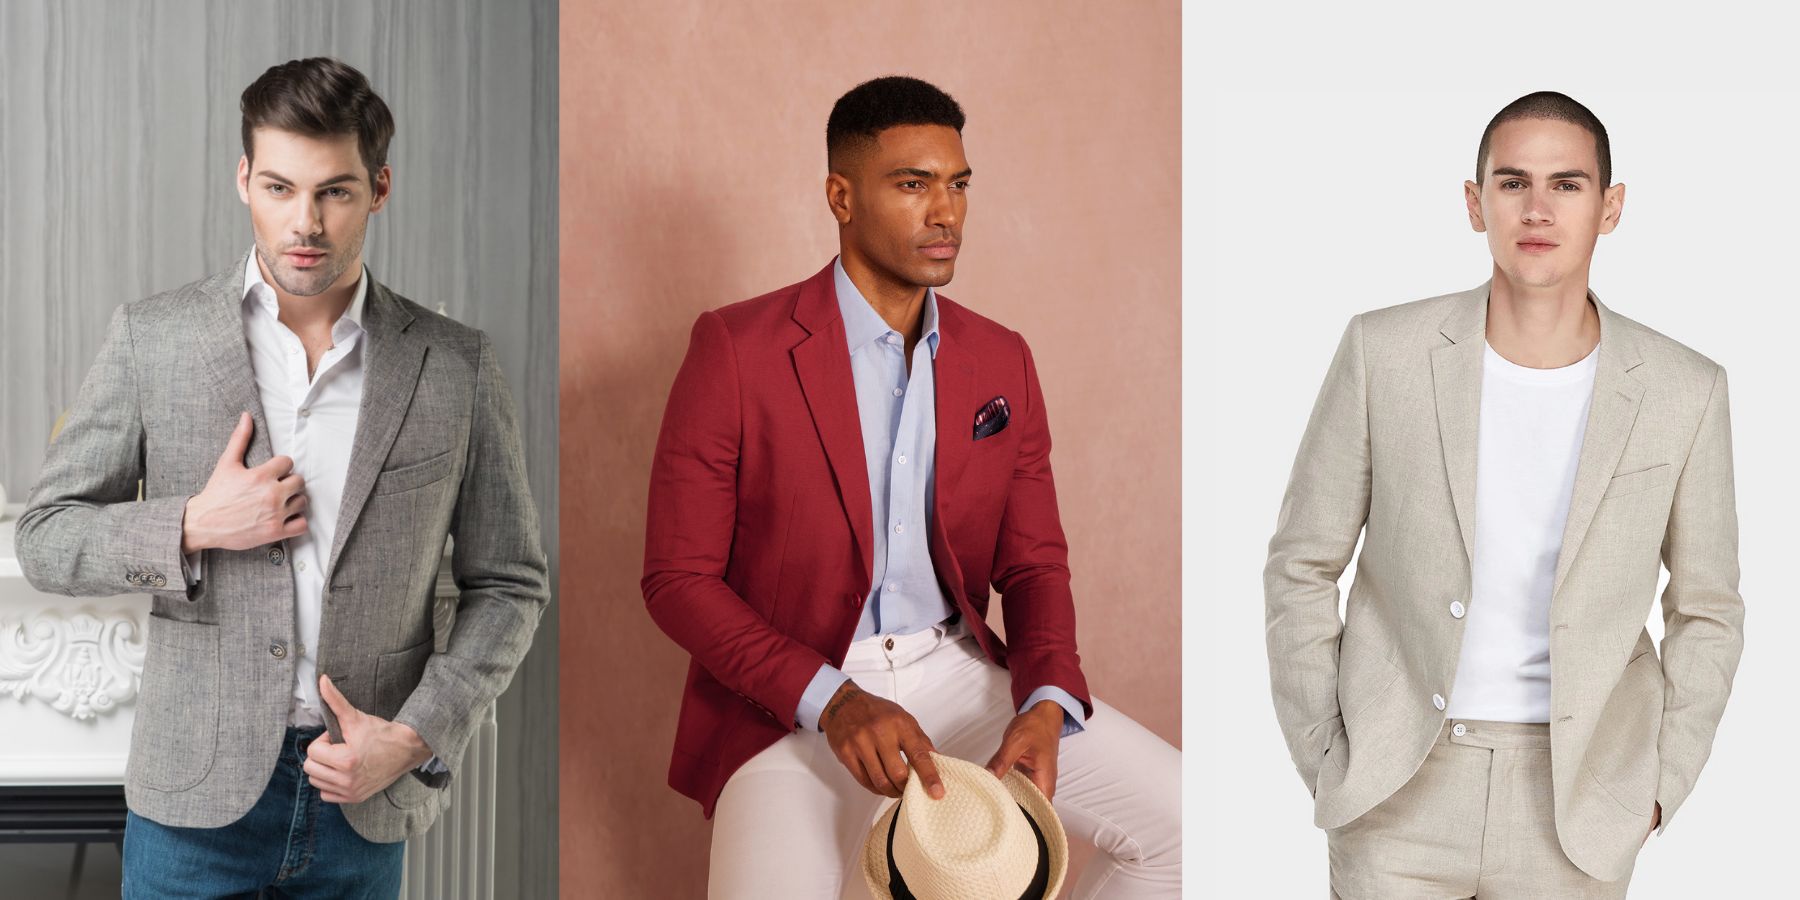 Differentiating Sport Coats, Blazers, and Suit Coats - Why It Matters